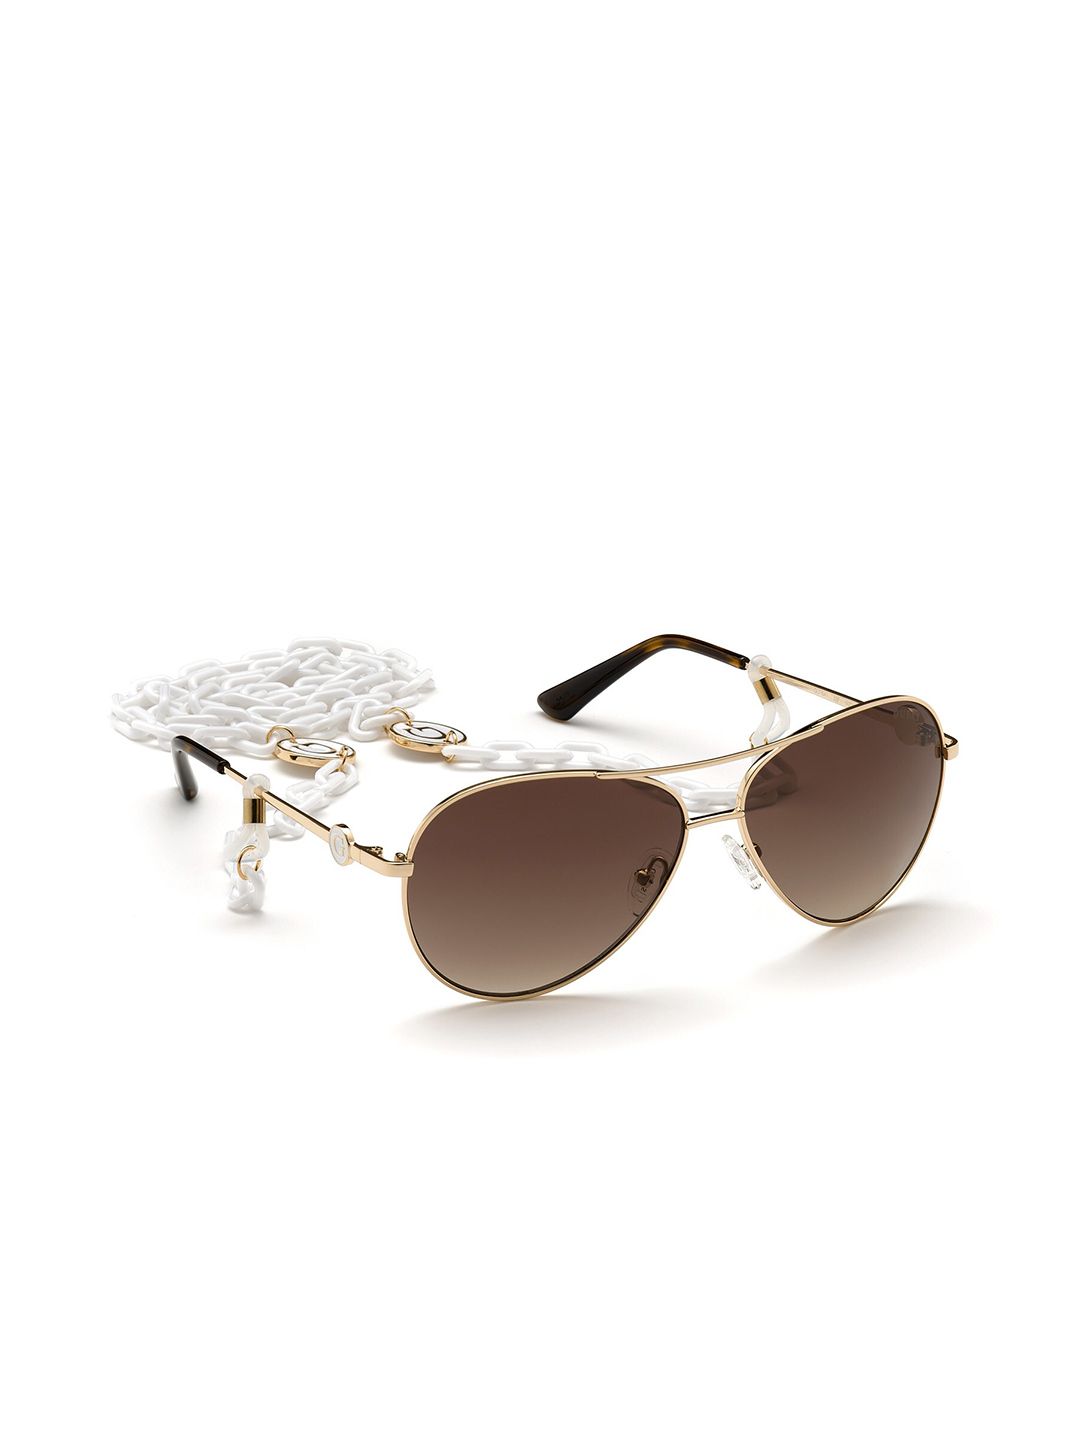 GUESS Women Brown Lens & Gold-Toned Aviator Sunglasses with UV Protected Lens Price in India